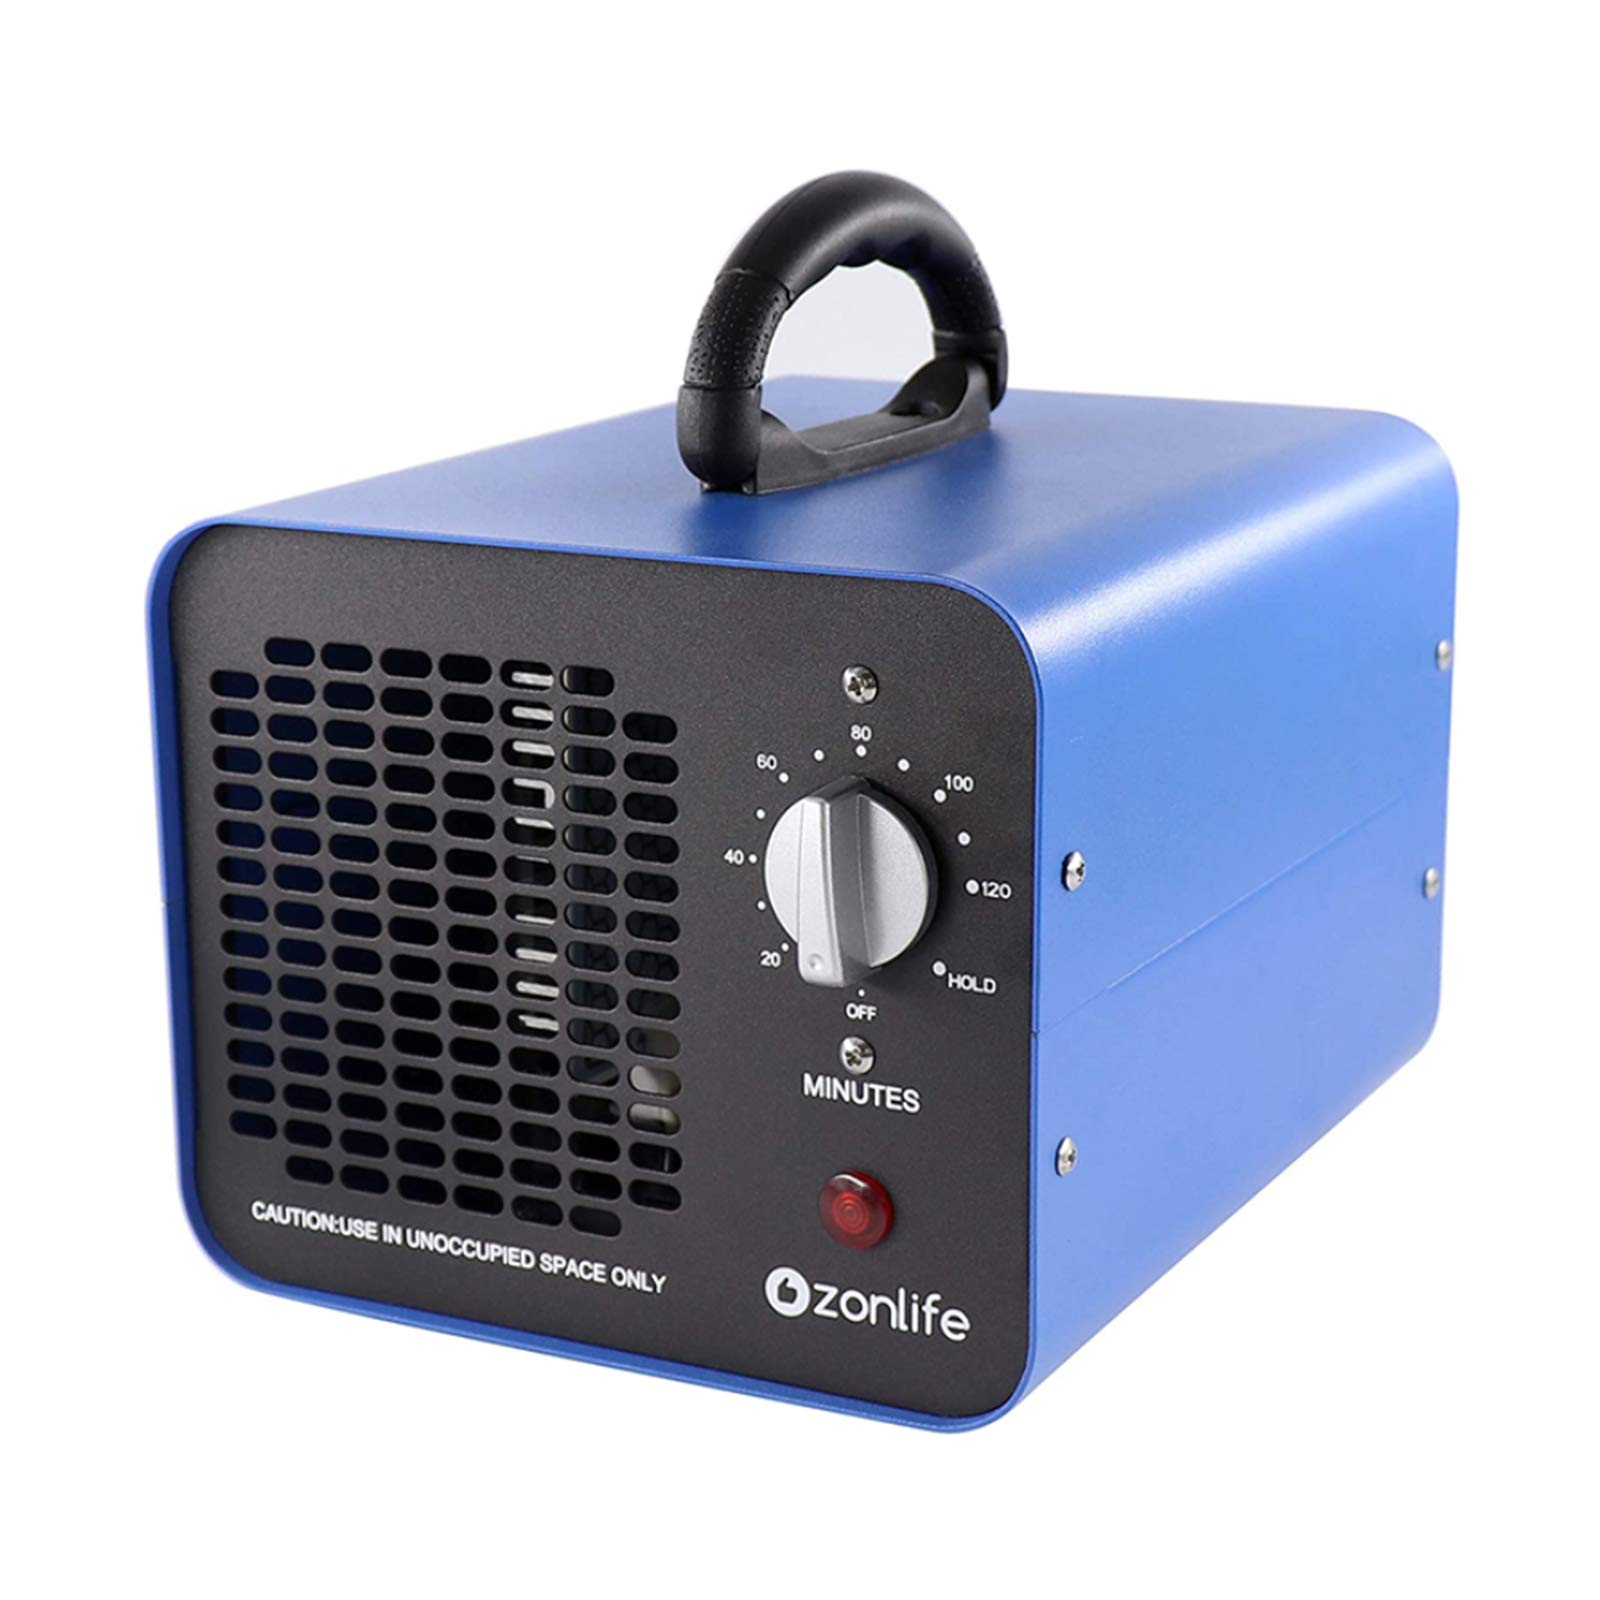 Ozonlife Ozone Generator Air Purifier 10,000 mg/h O3 Ozone Machine Odor Removal for Home Rooms Cars Smoke (Blue)